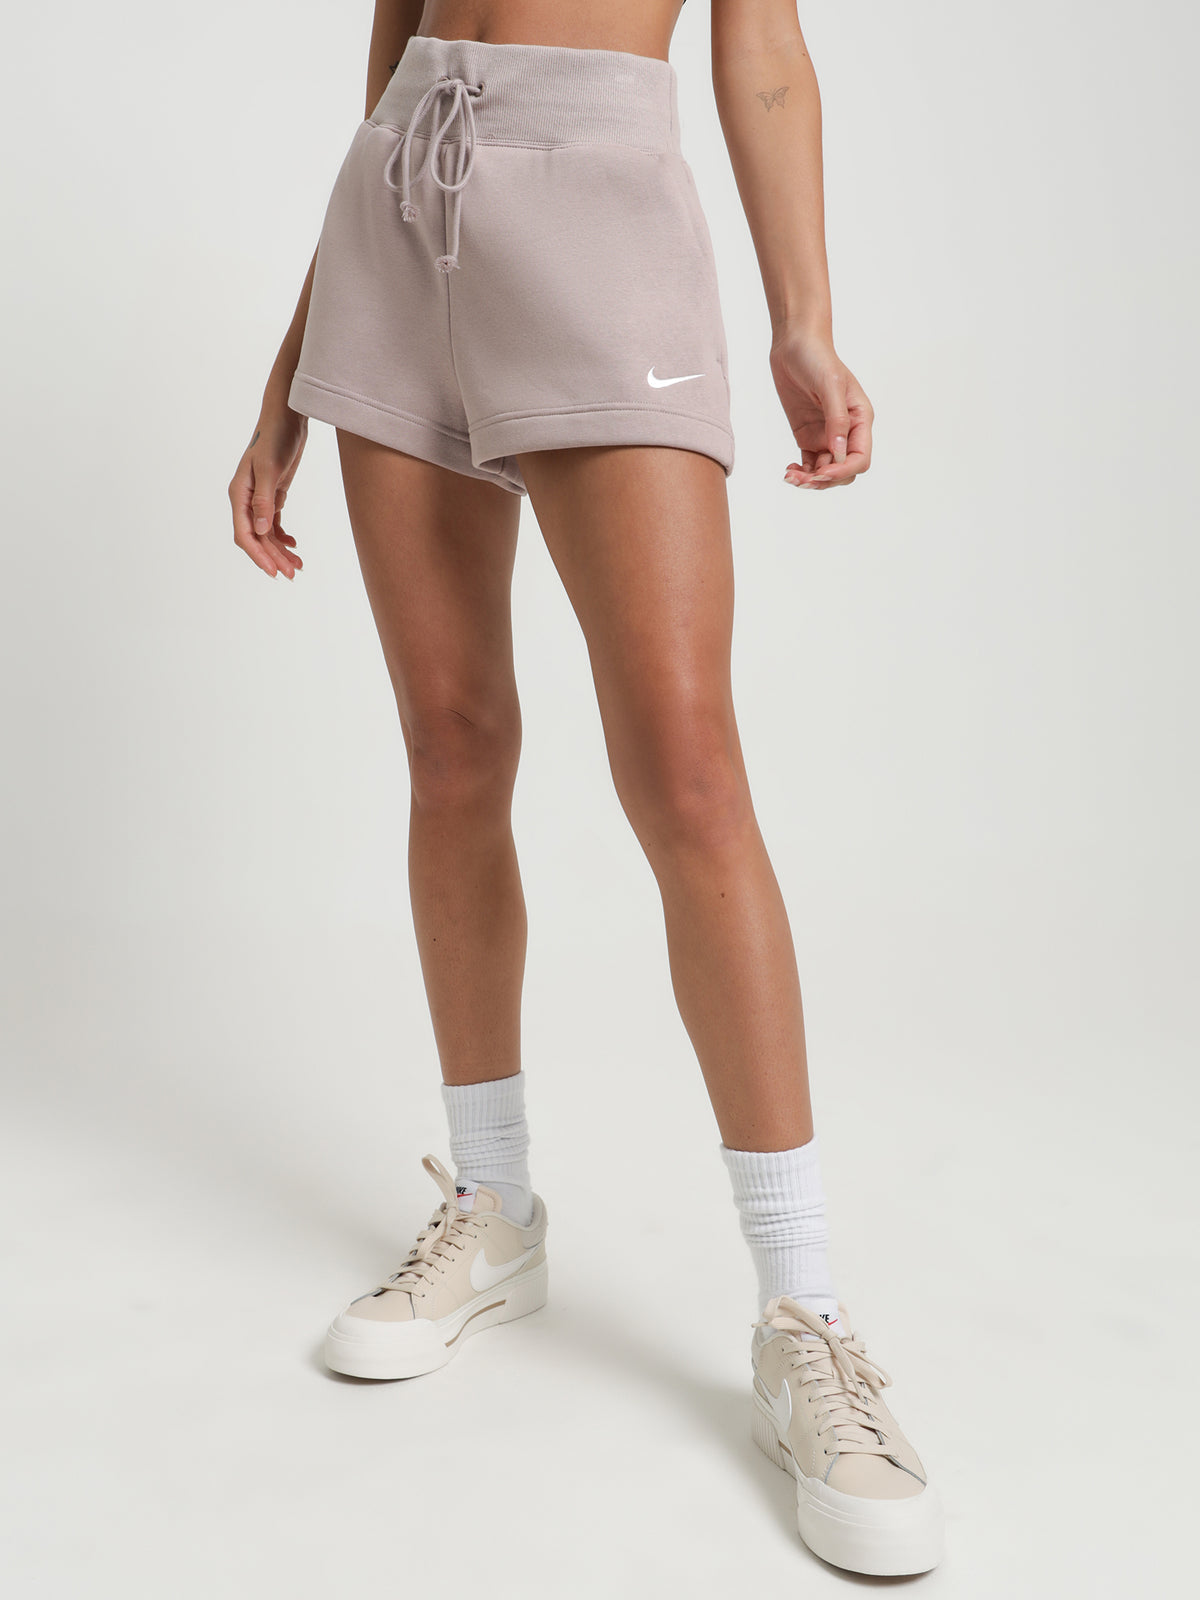 Highrise Diffused Store Phoenix Taupe Shorts in Glue Fleece Sportswear -